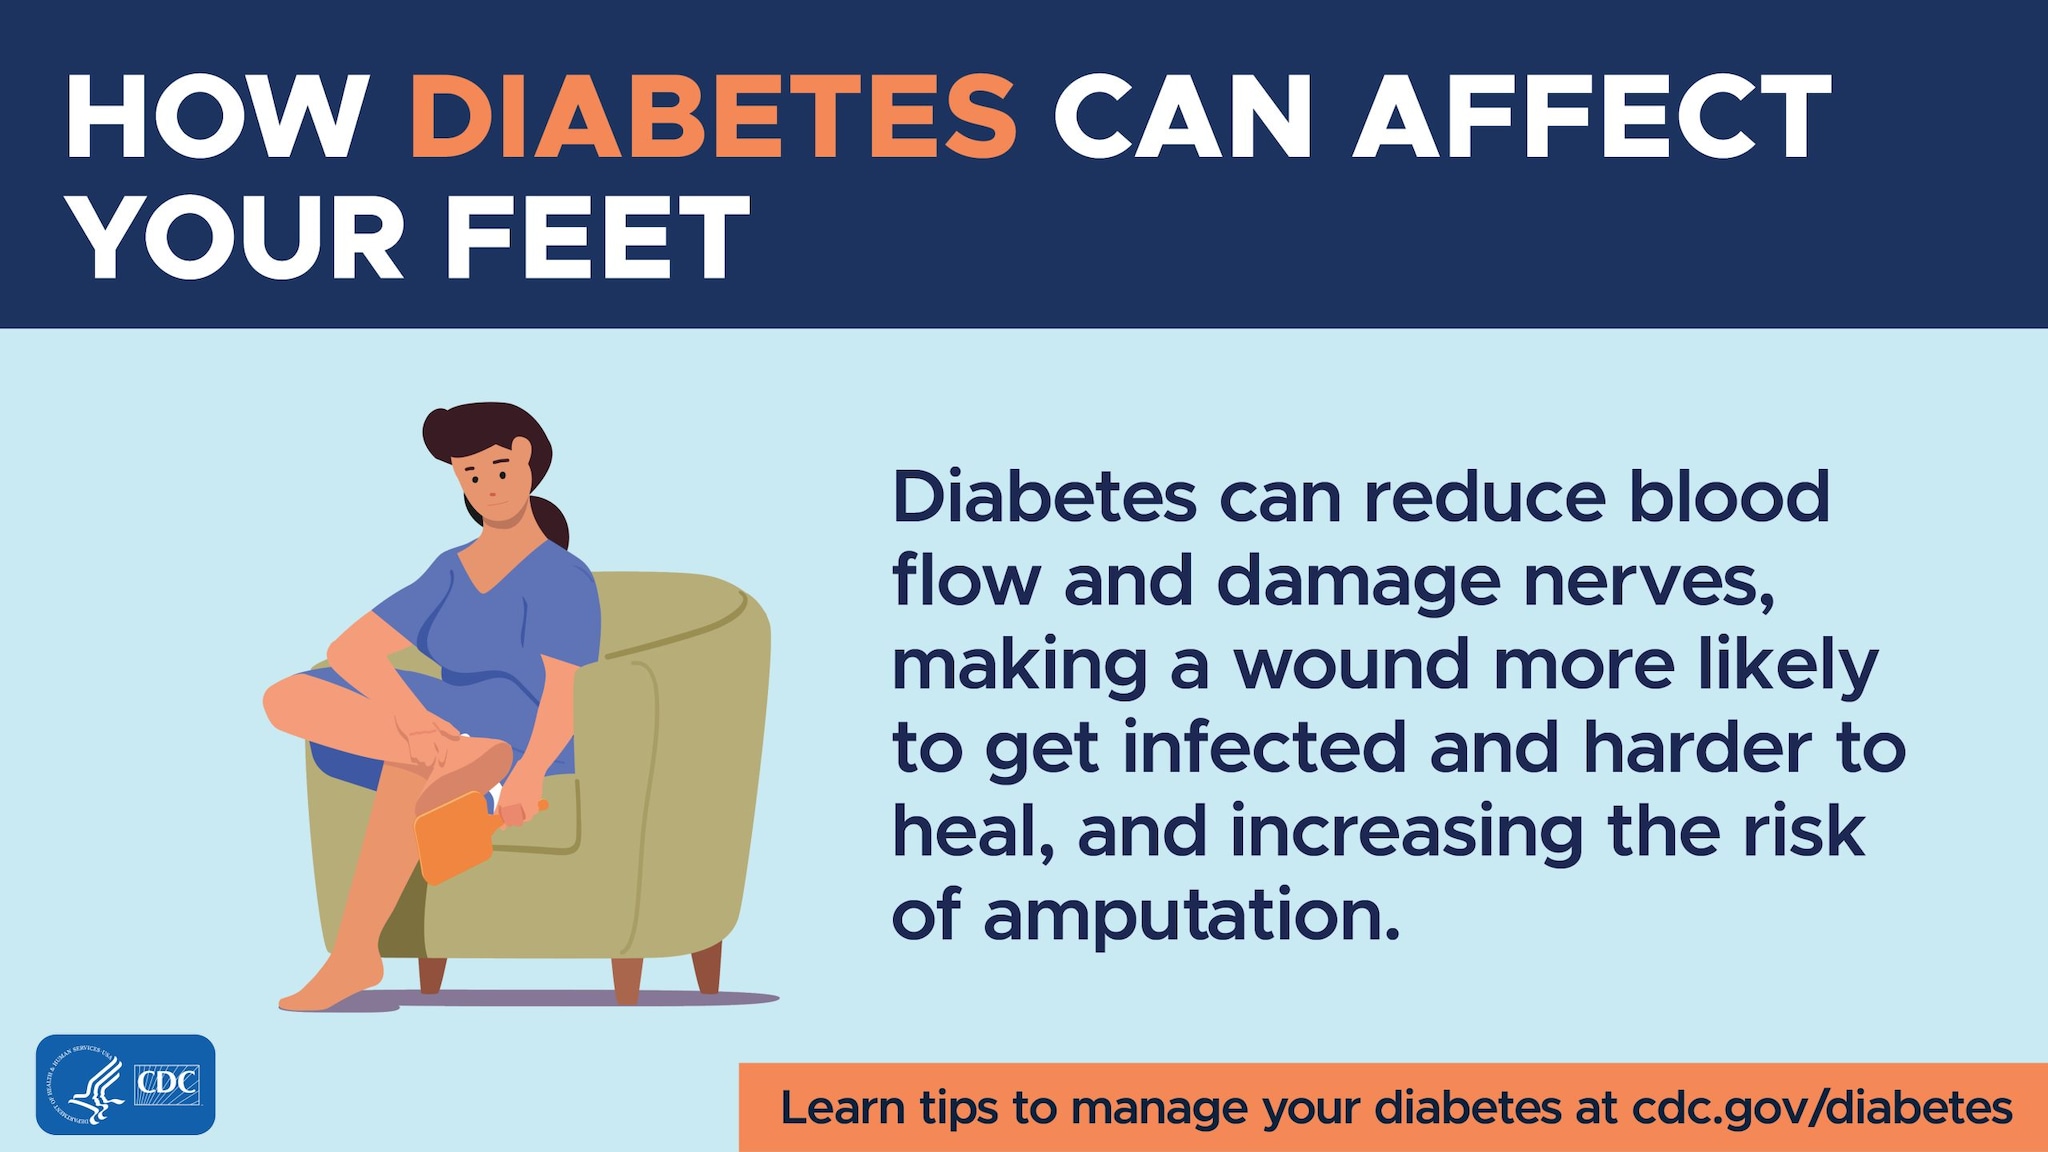 Diabetes can reduce blood flow and damage nerves, making a wound more likely to get infected and harder to heal, and increasing the risk of amputation.